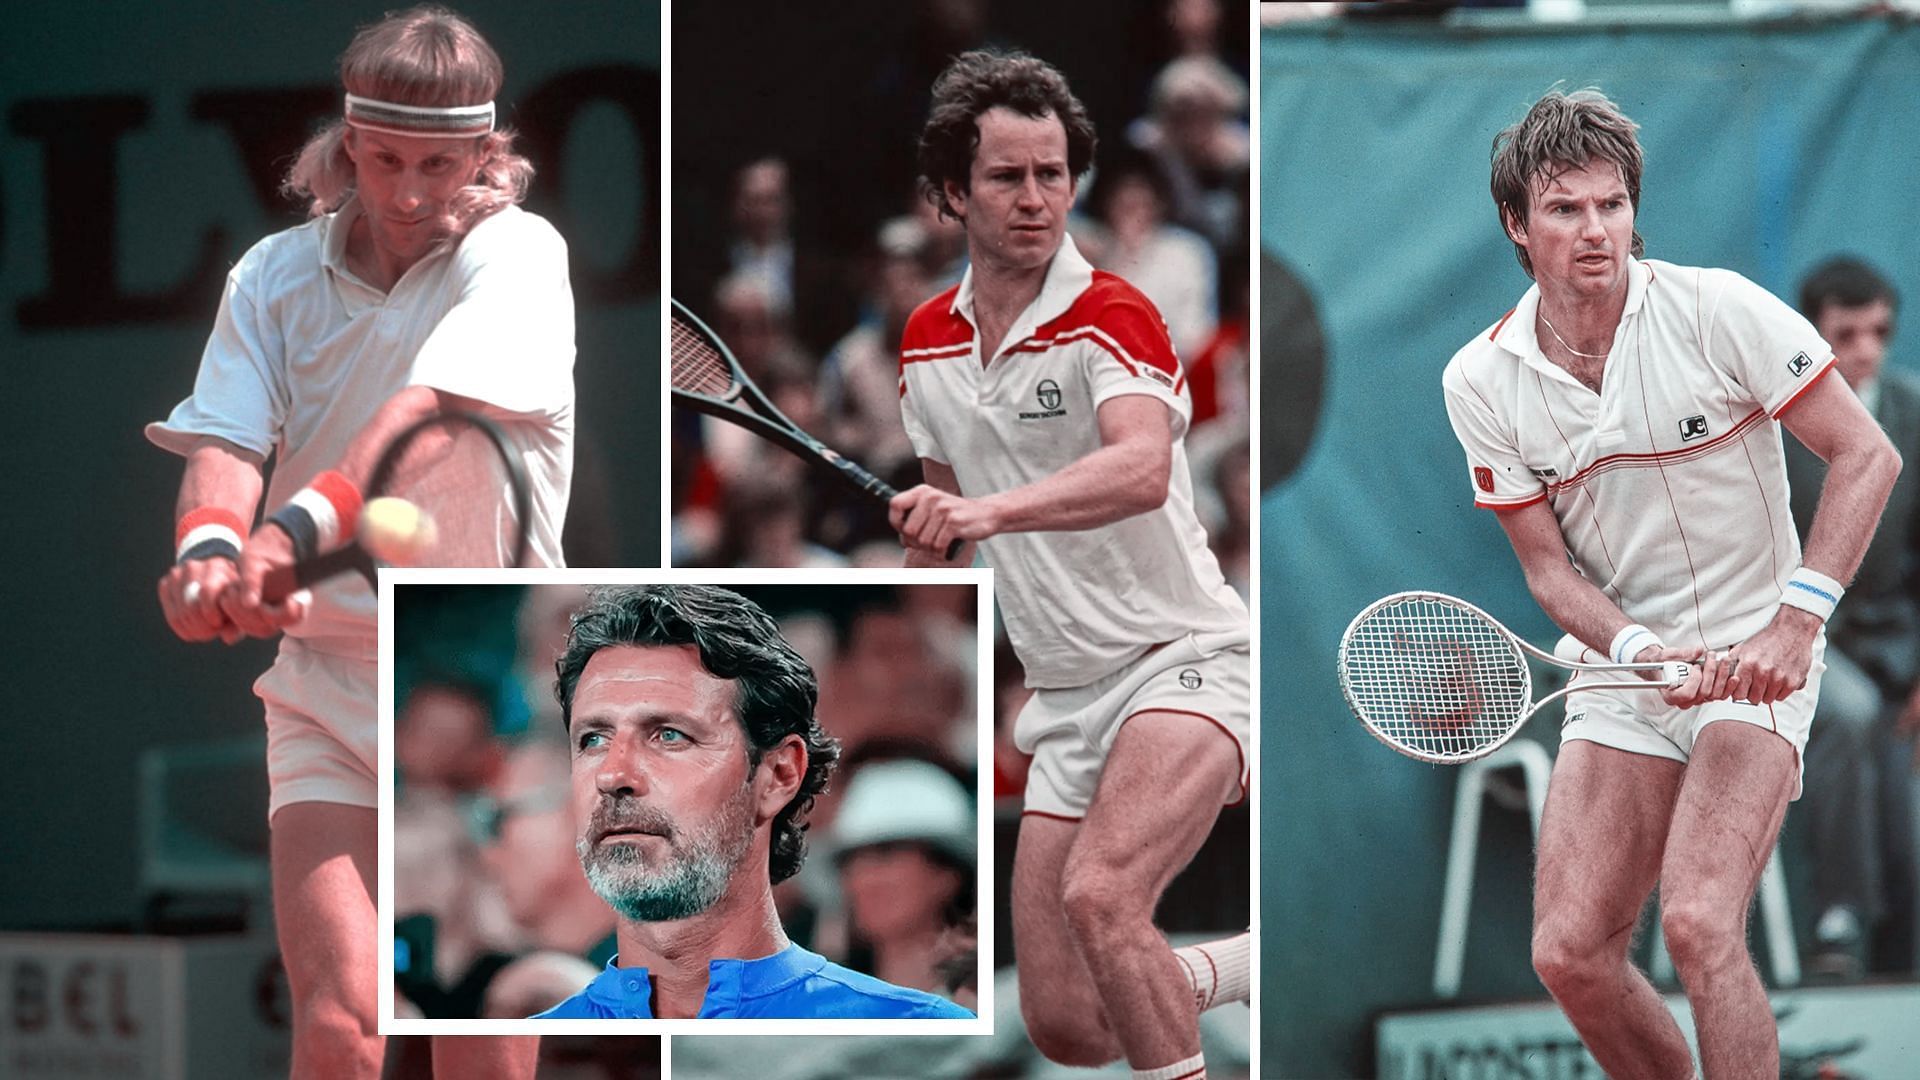 John McEnroe's volley, Jimmy Connors' backhand, Bjorn Borg's return and more: Patrick Mouratoglou picks his best players from the 1980s